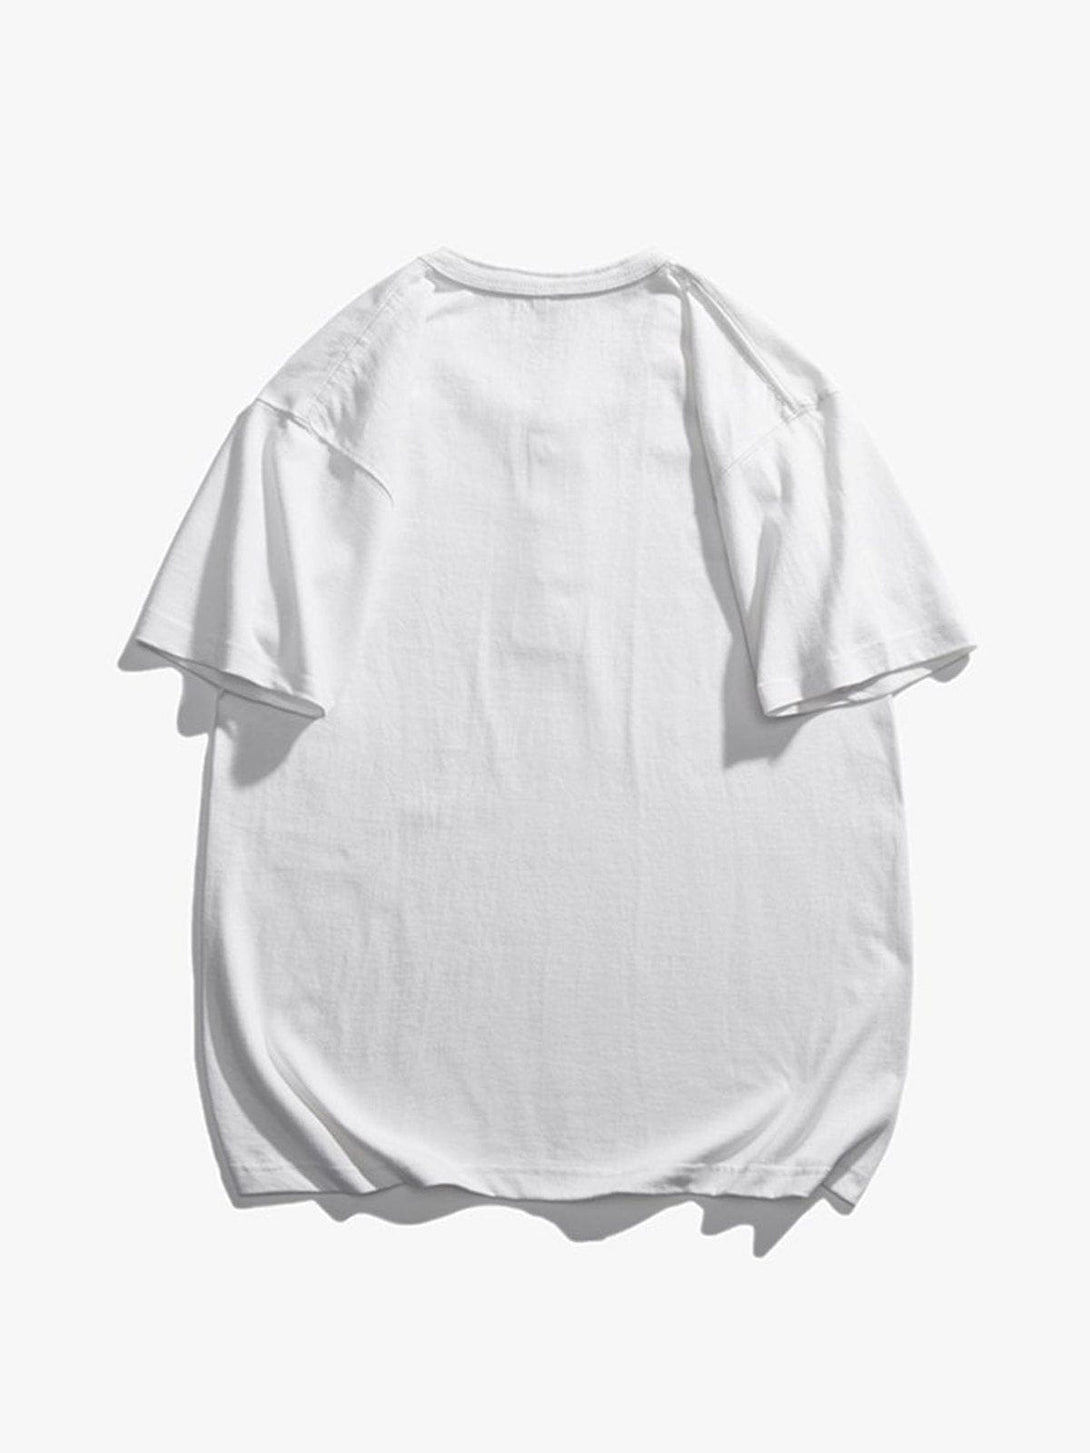 Ellesey - Solid Buttons Cotton Tee- Streetwear Fashion - ellesey.com